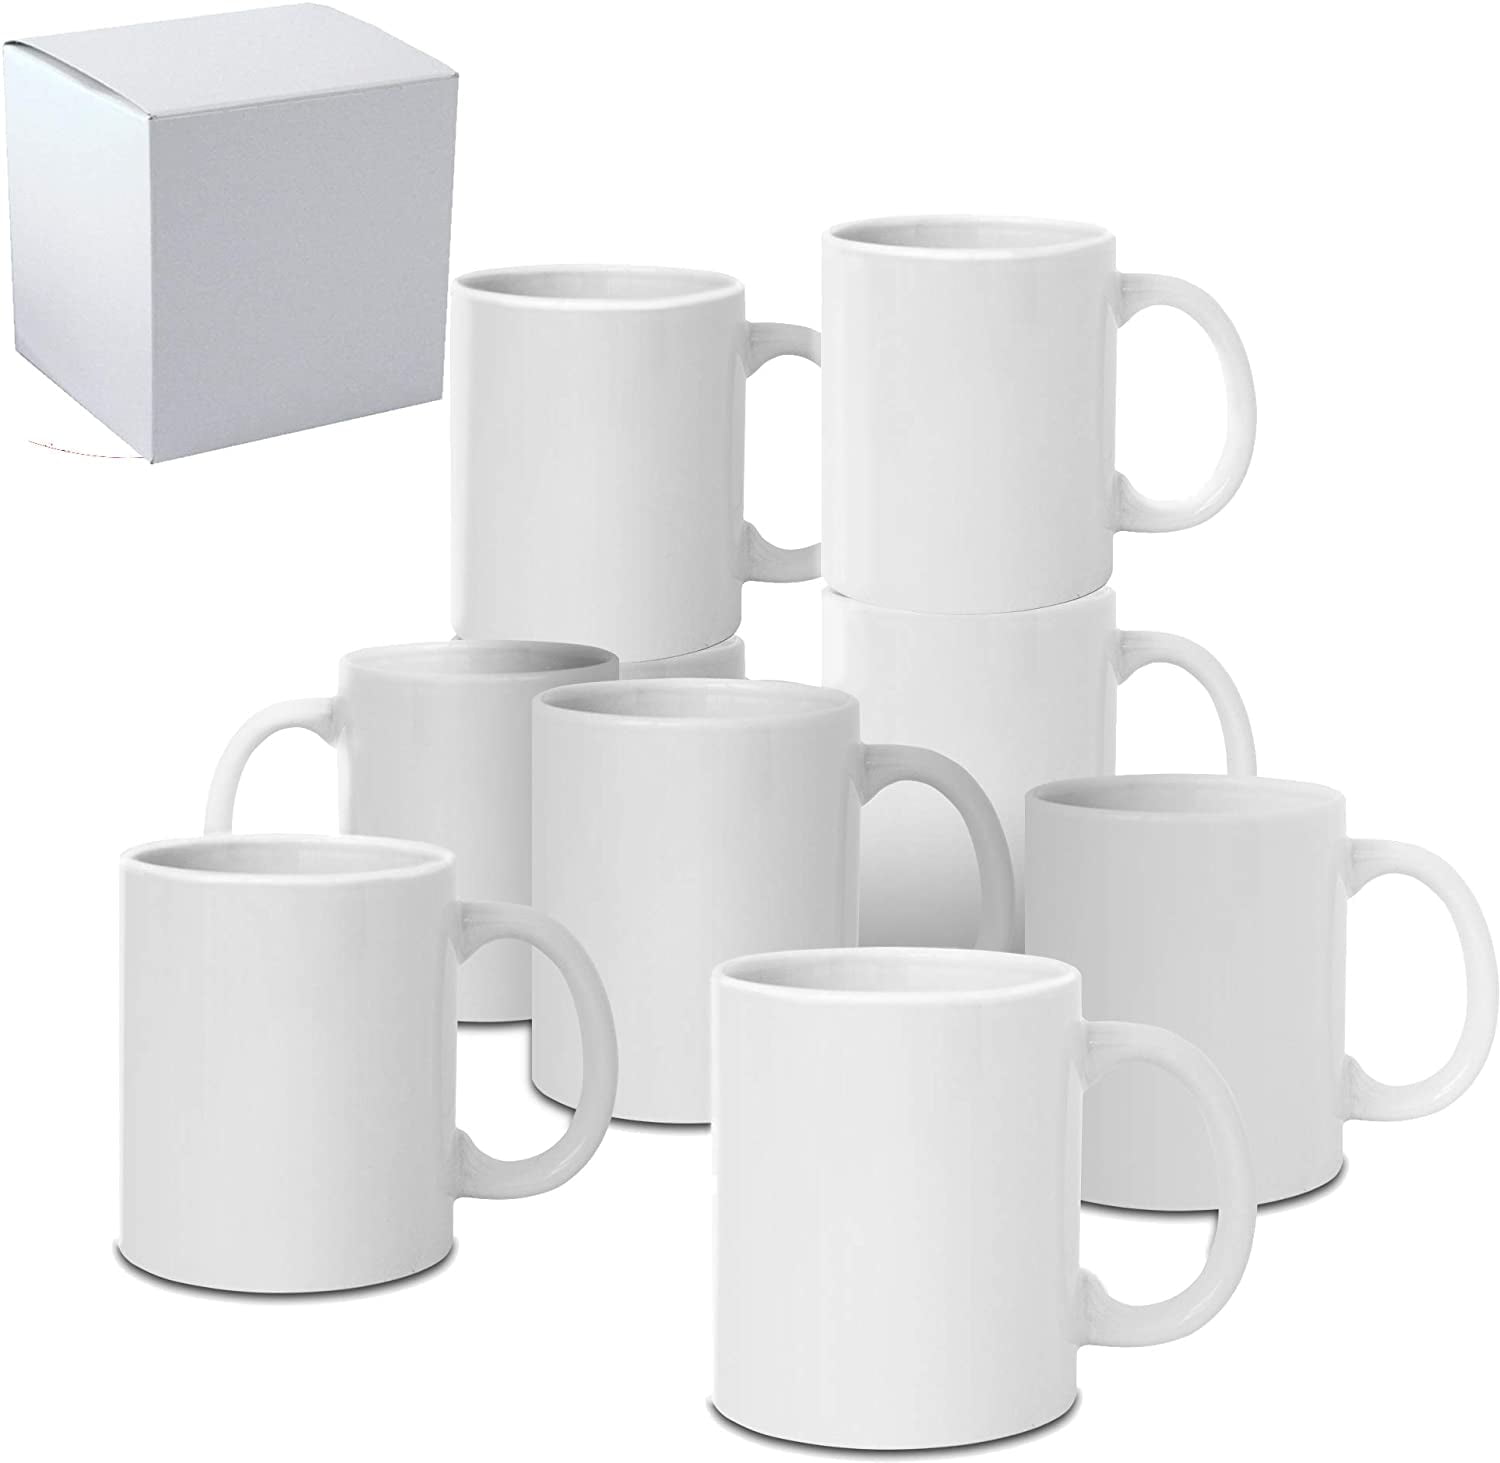 11oz White Sublimation Plain Mugs Blank Ceramic Plain Mugs Ceramic Coffee  Plain Mugs Sublimation Blanks Classic Cup For Coffee Milk Hot Cocoa Tea  Latte For DIY From Hc_network, $1.5